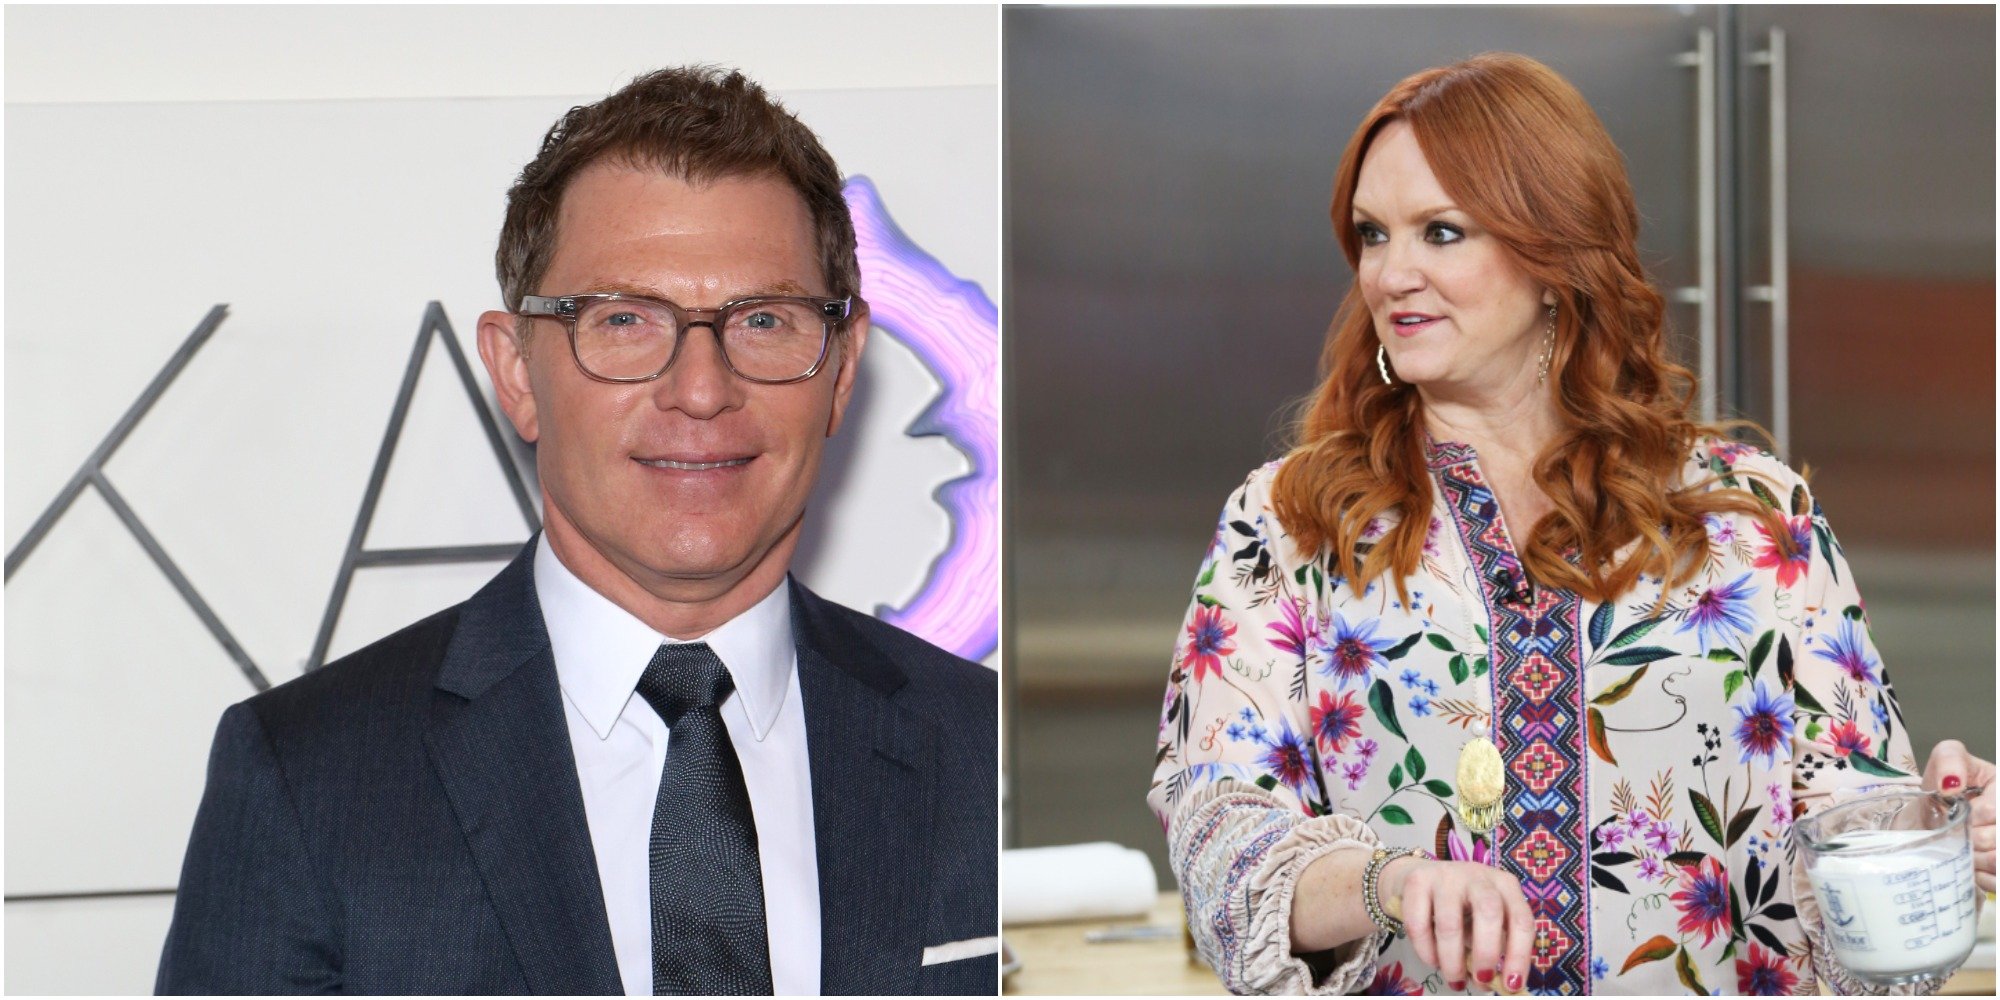 Bobby Flay and Ree Drummond in a set of side by side photographs.